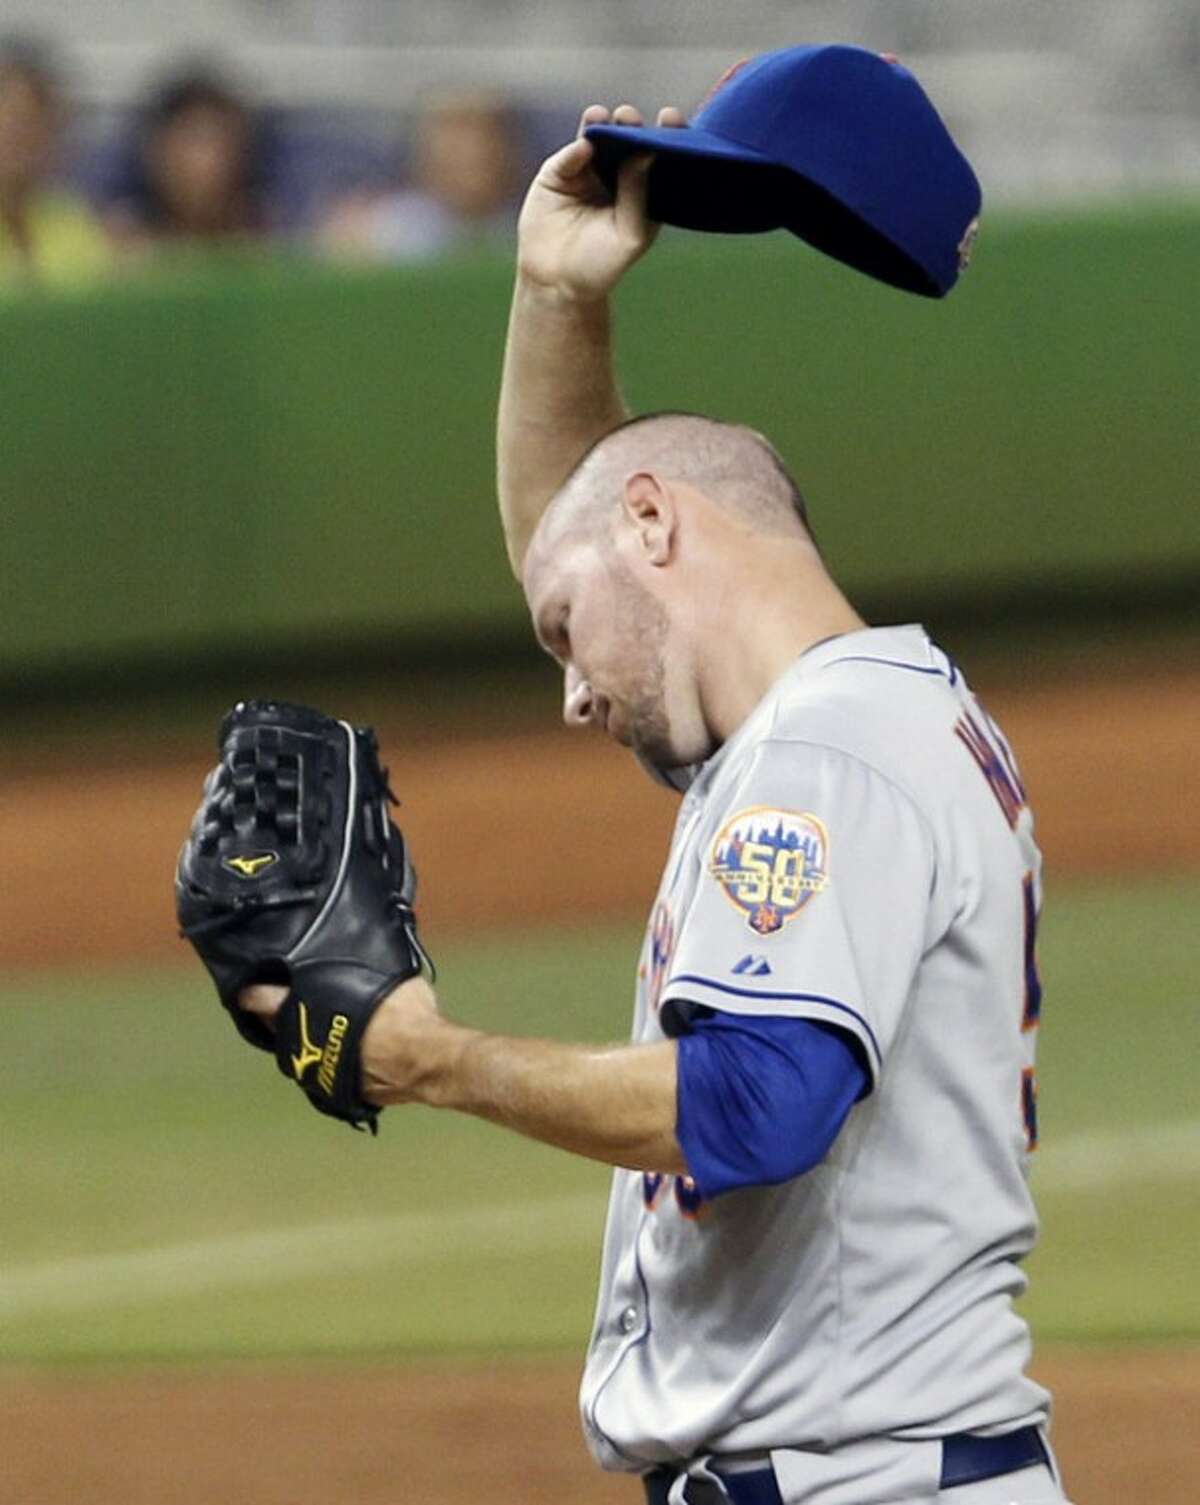 New York Mets' Jeremy Hefner wipes his face after walking Miami Marlins' Justin Ruggiano in the third inning of a baseball game in Miami, Saturday, Sept. 1, 2012. (AP Photo/Alan Diaz)